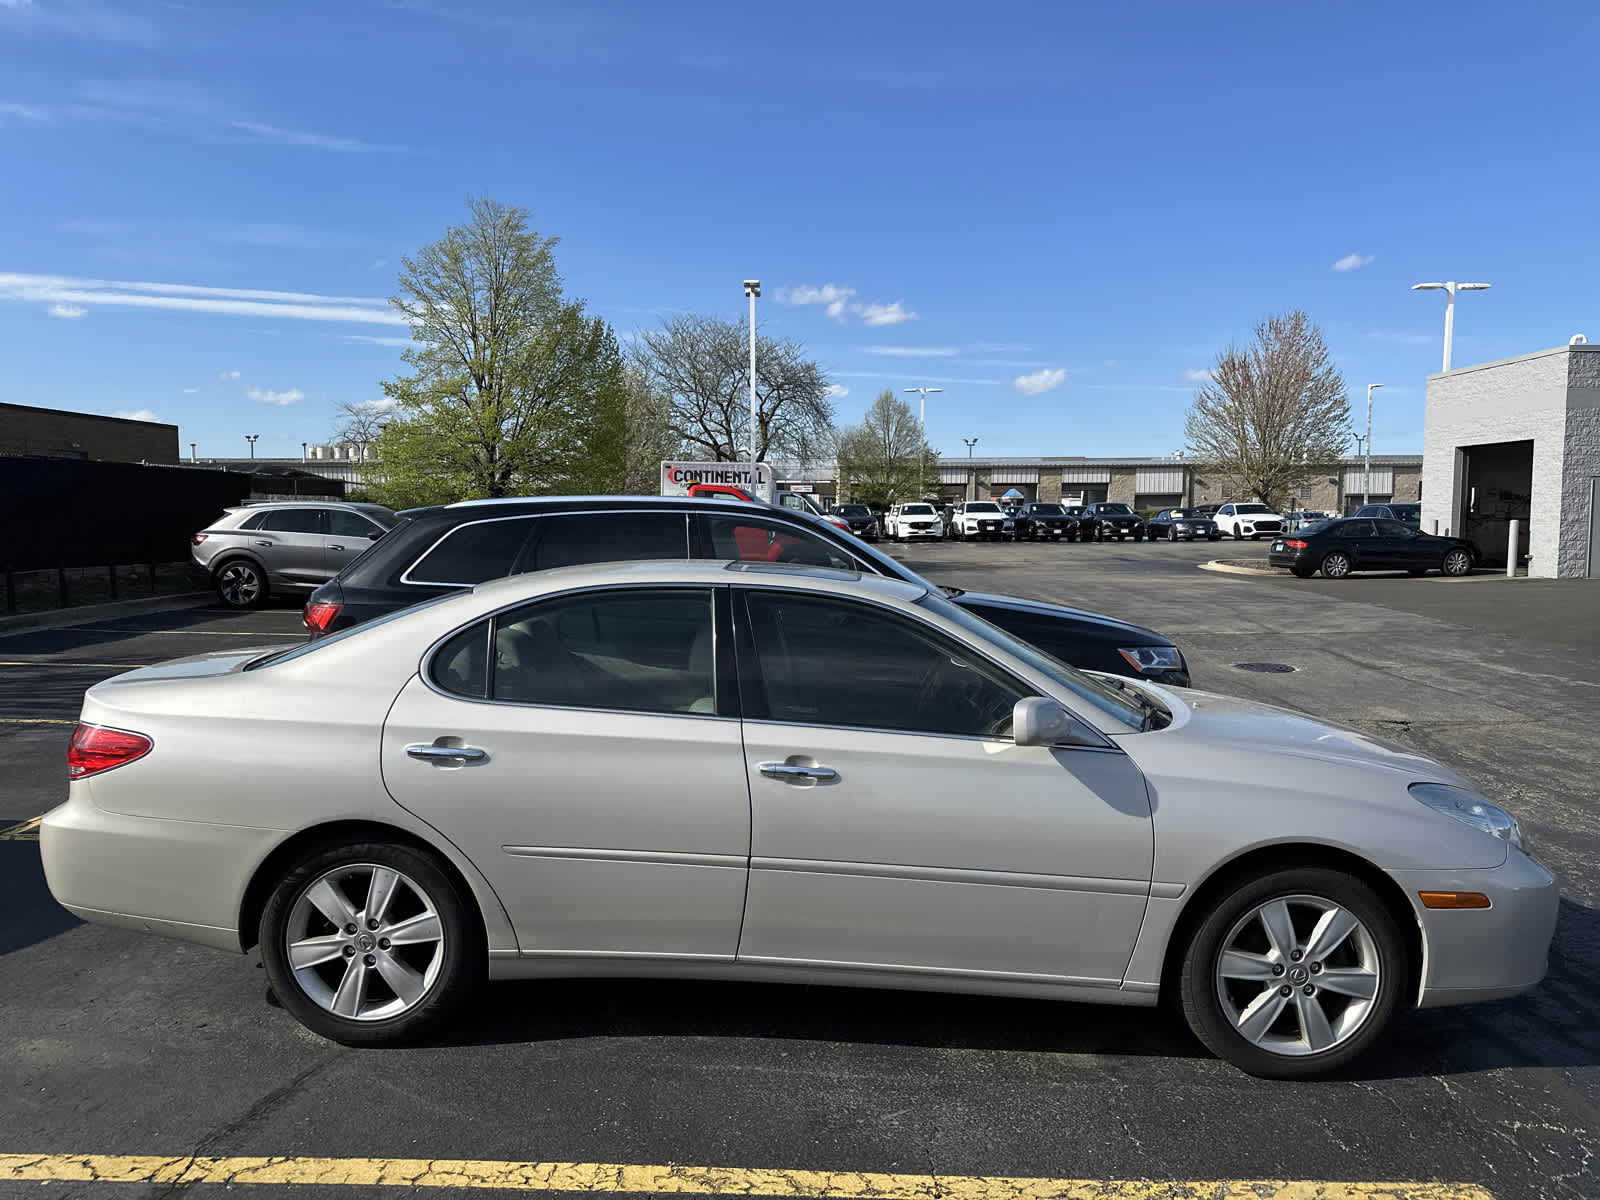 Used 2005 Lexus ES 330 with VIN JTHBA30G855115314 for sale in Naperville, IL